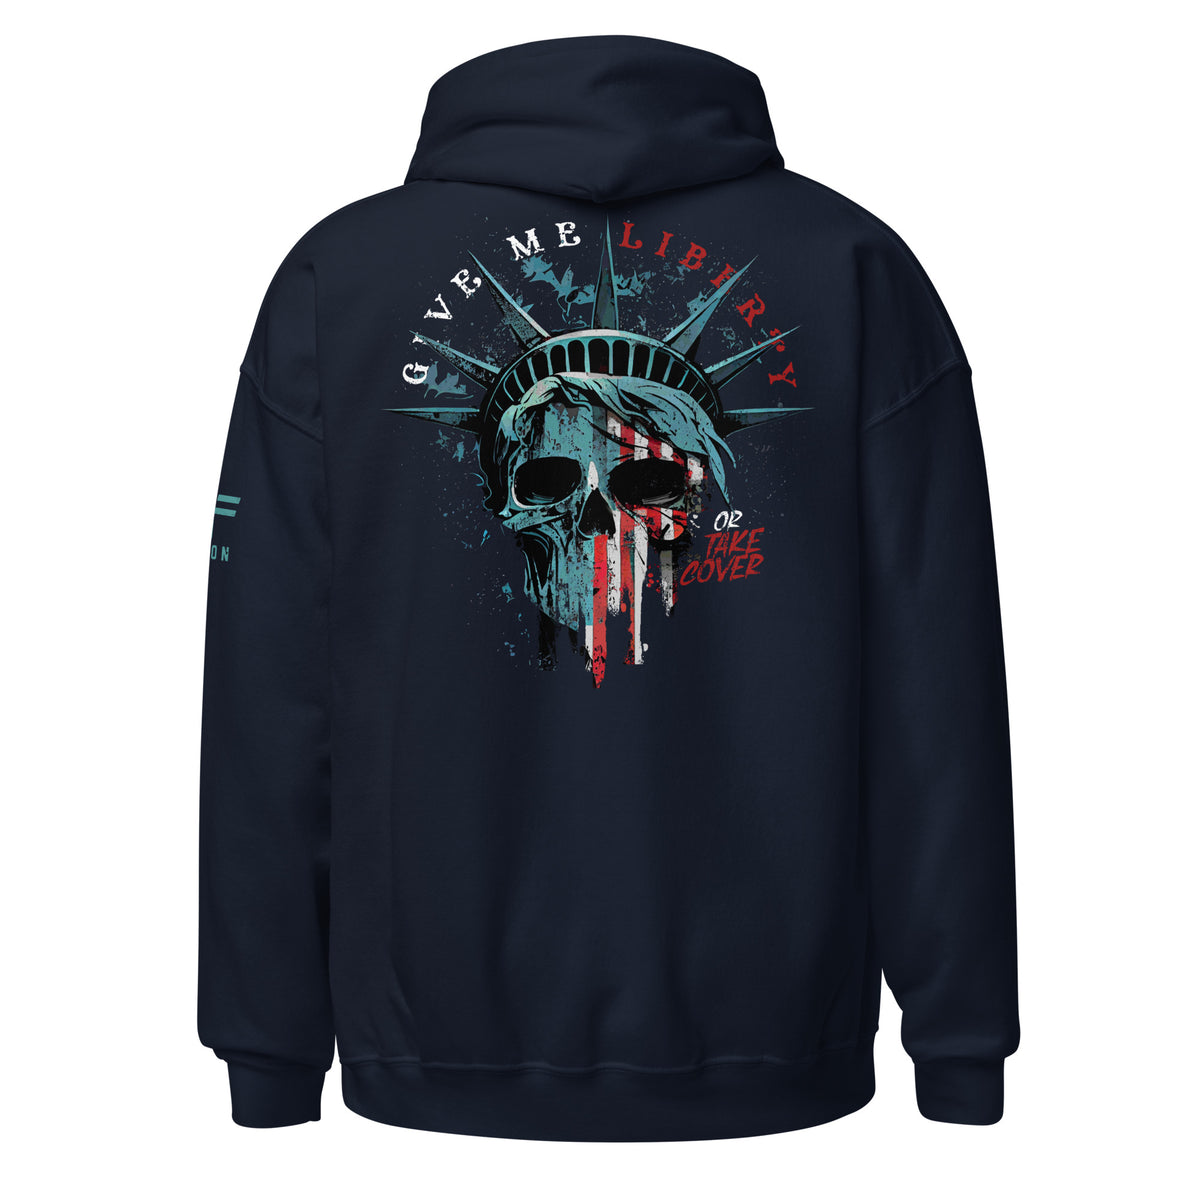 Give Me Liberty or Take Cover Hoodie